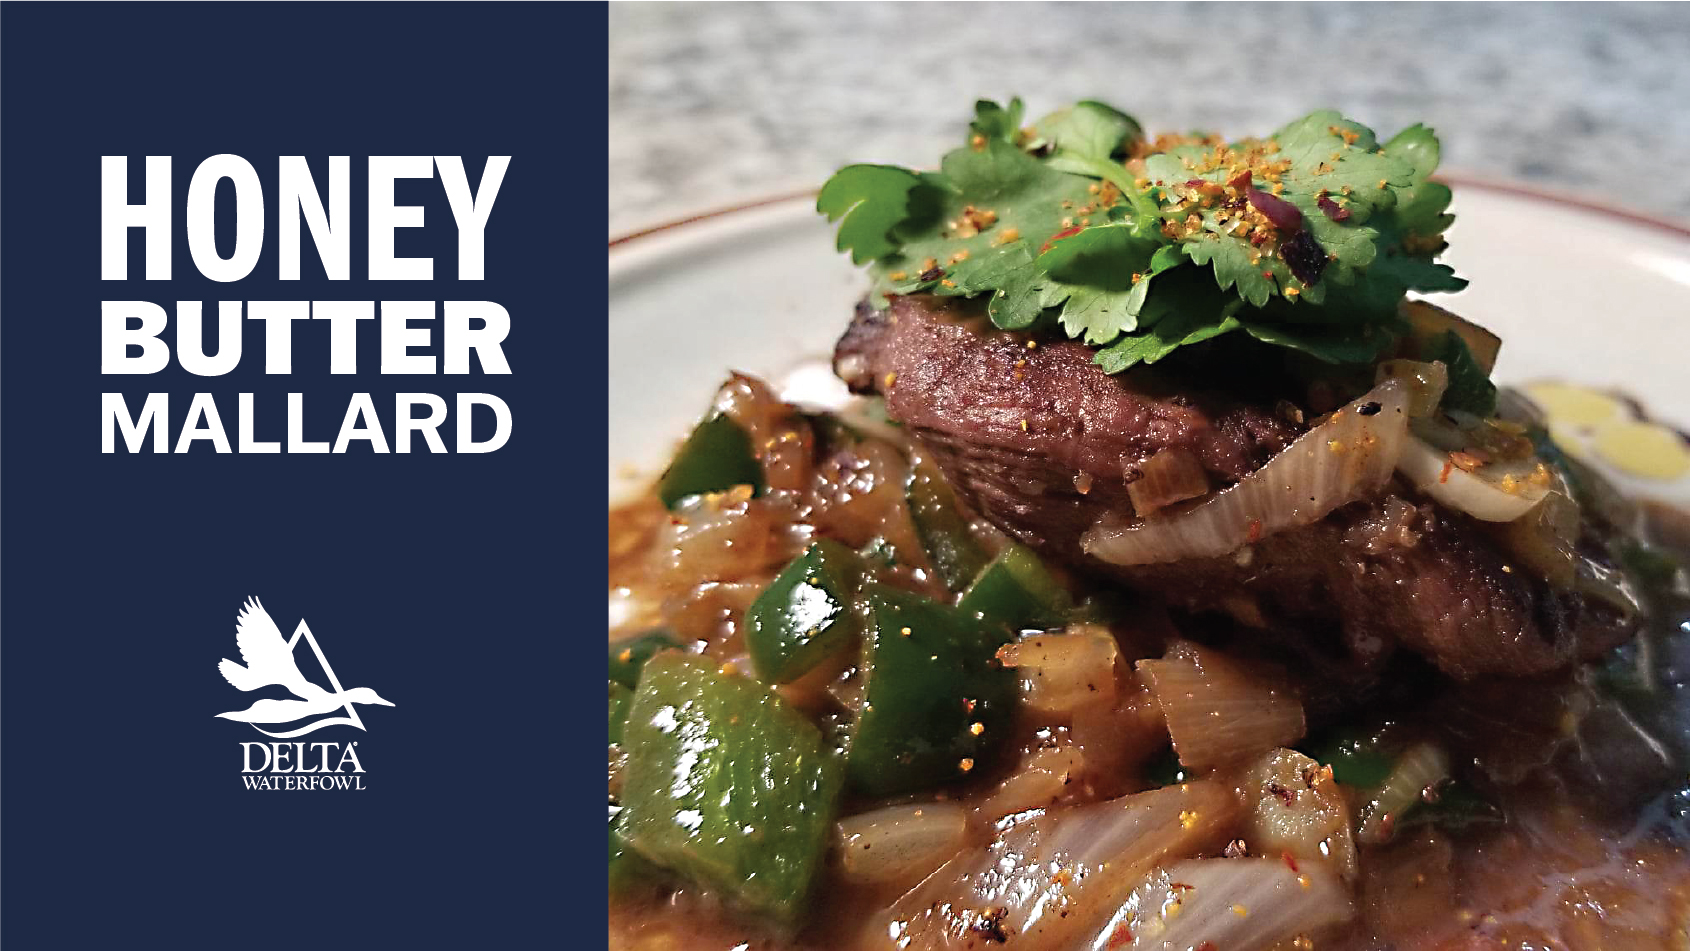 The duck breast is pictured on top of the cooked vegetables with sauce. Cilantro garnishes the top.